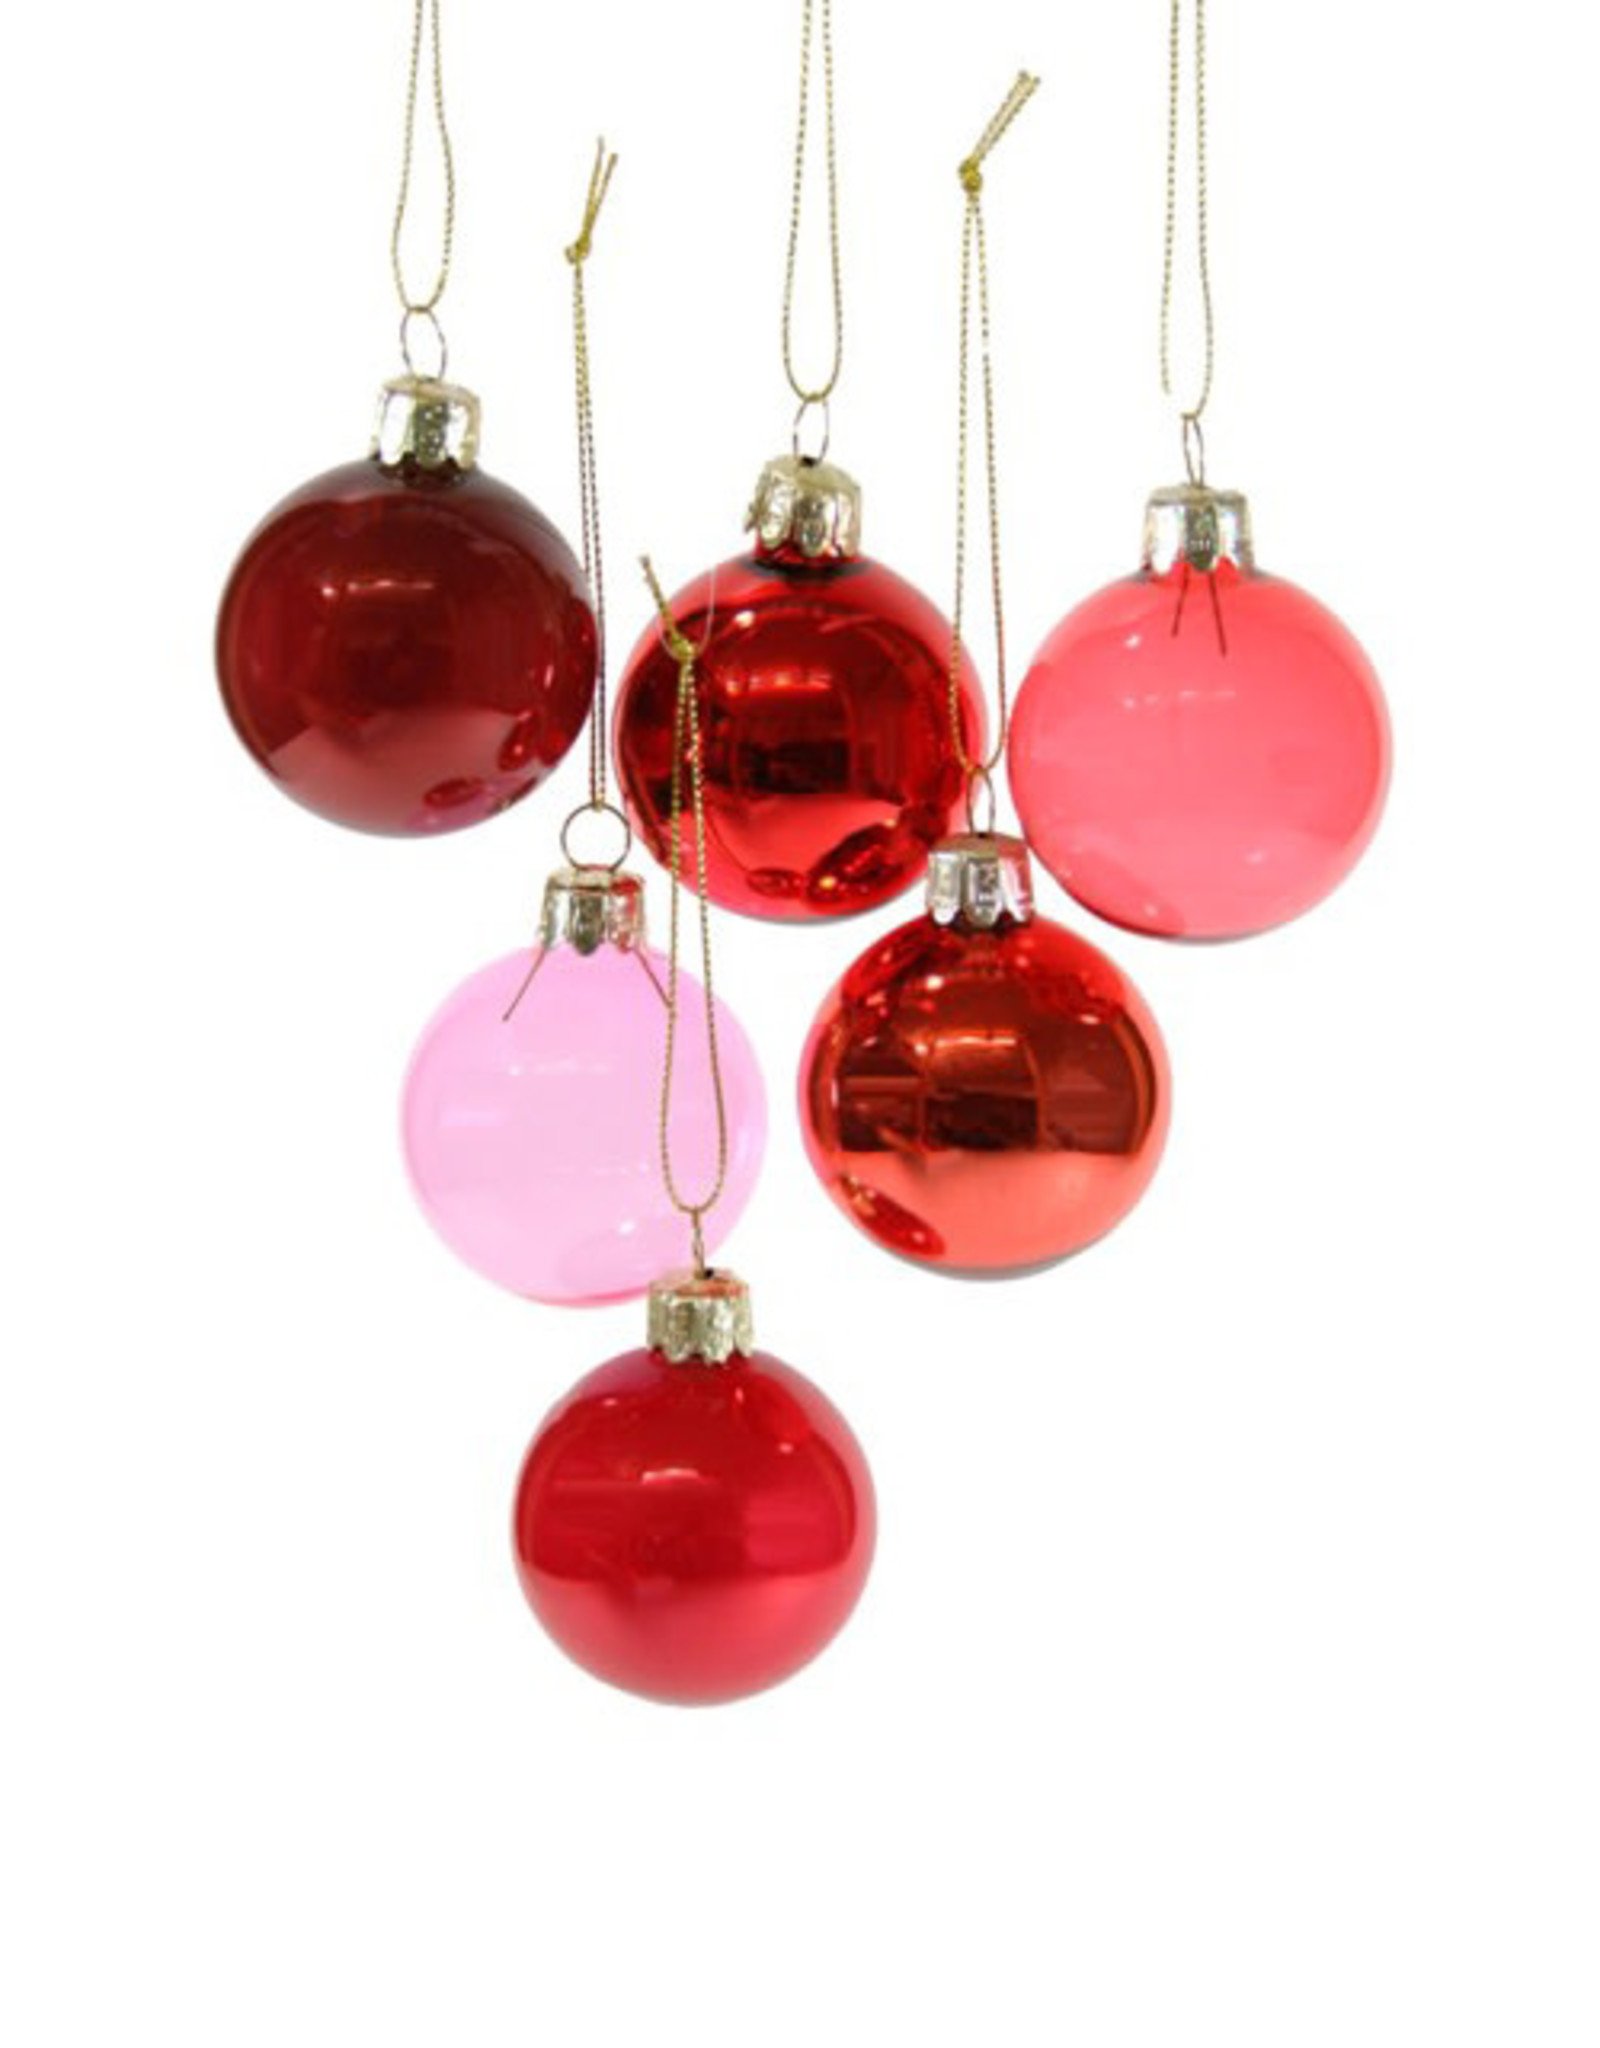 Cody Foster & Co. SMALL RED HUE ORNAMENTS - 6 STYLES